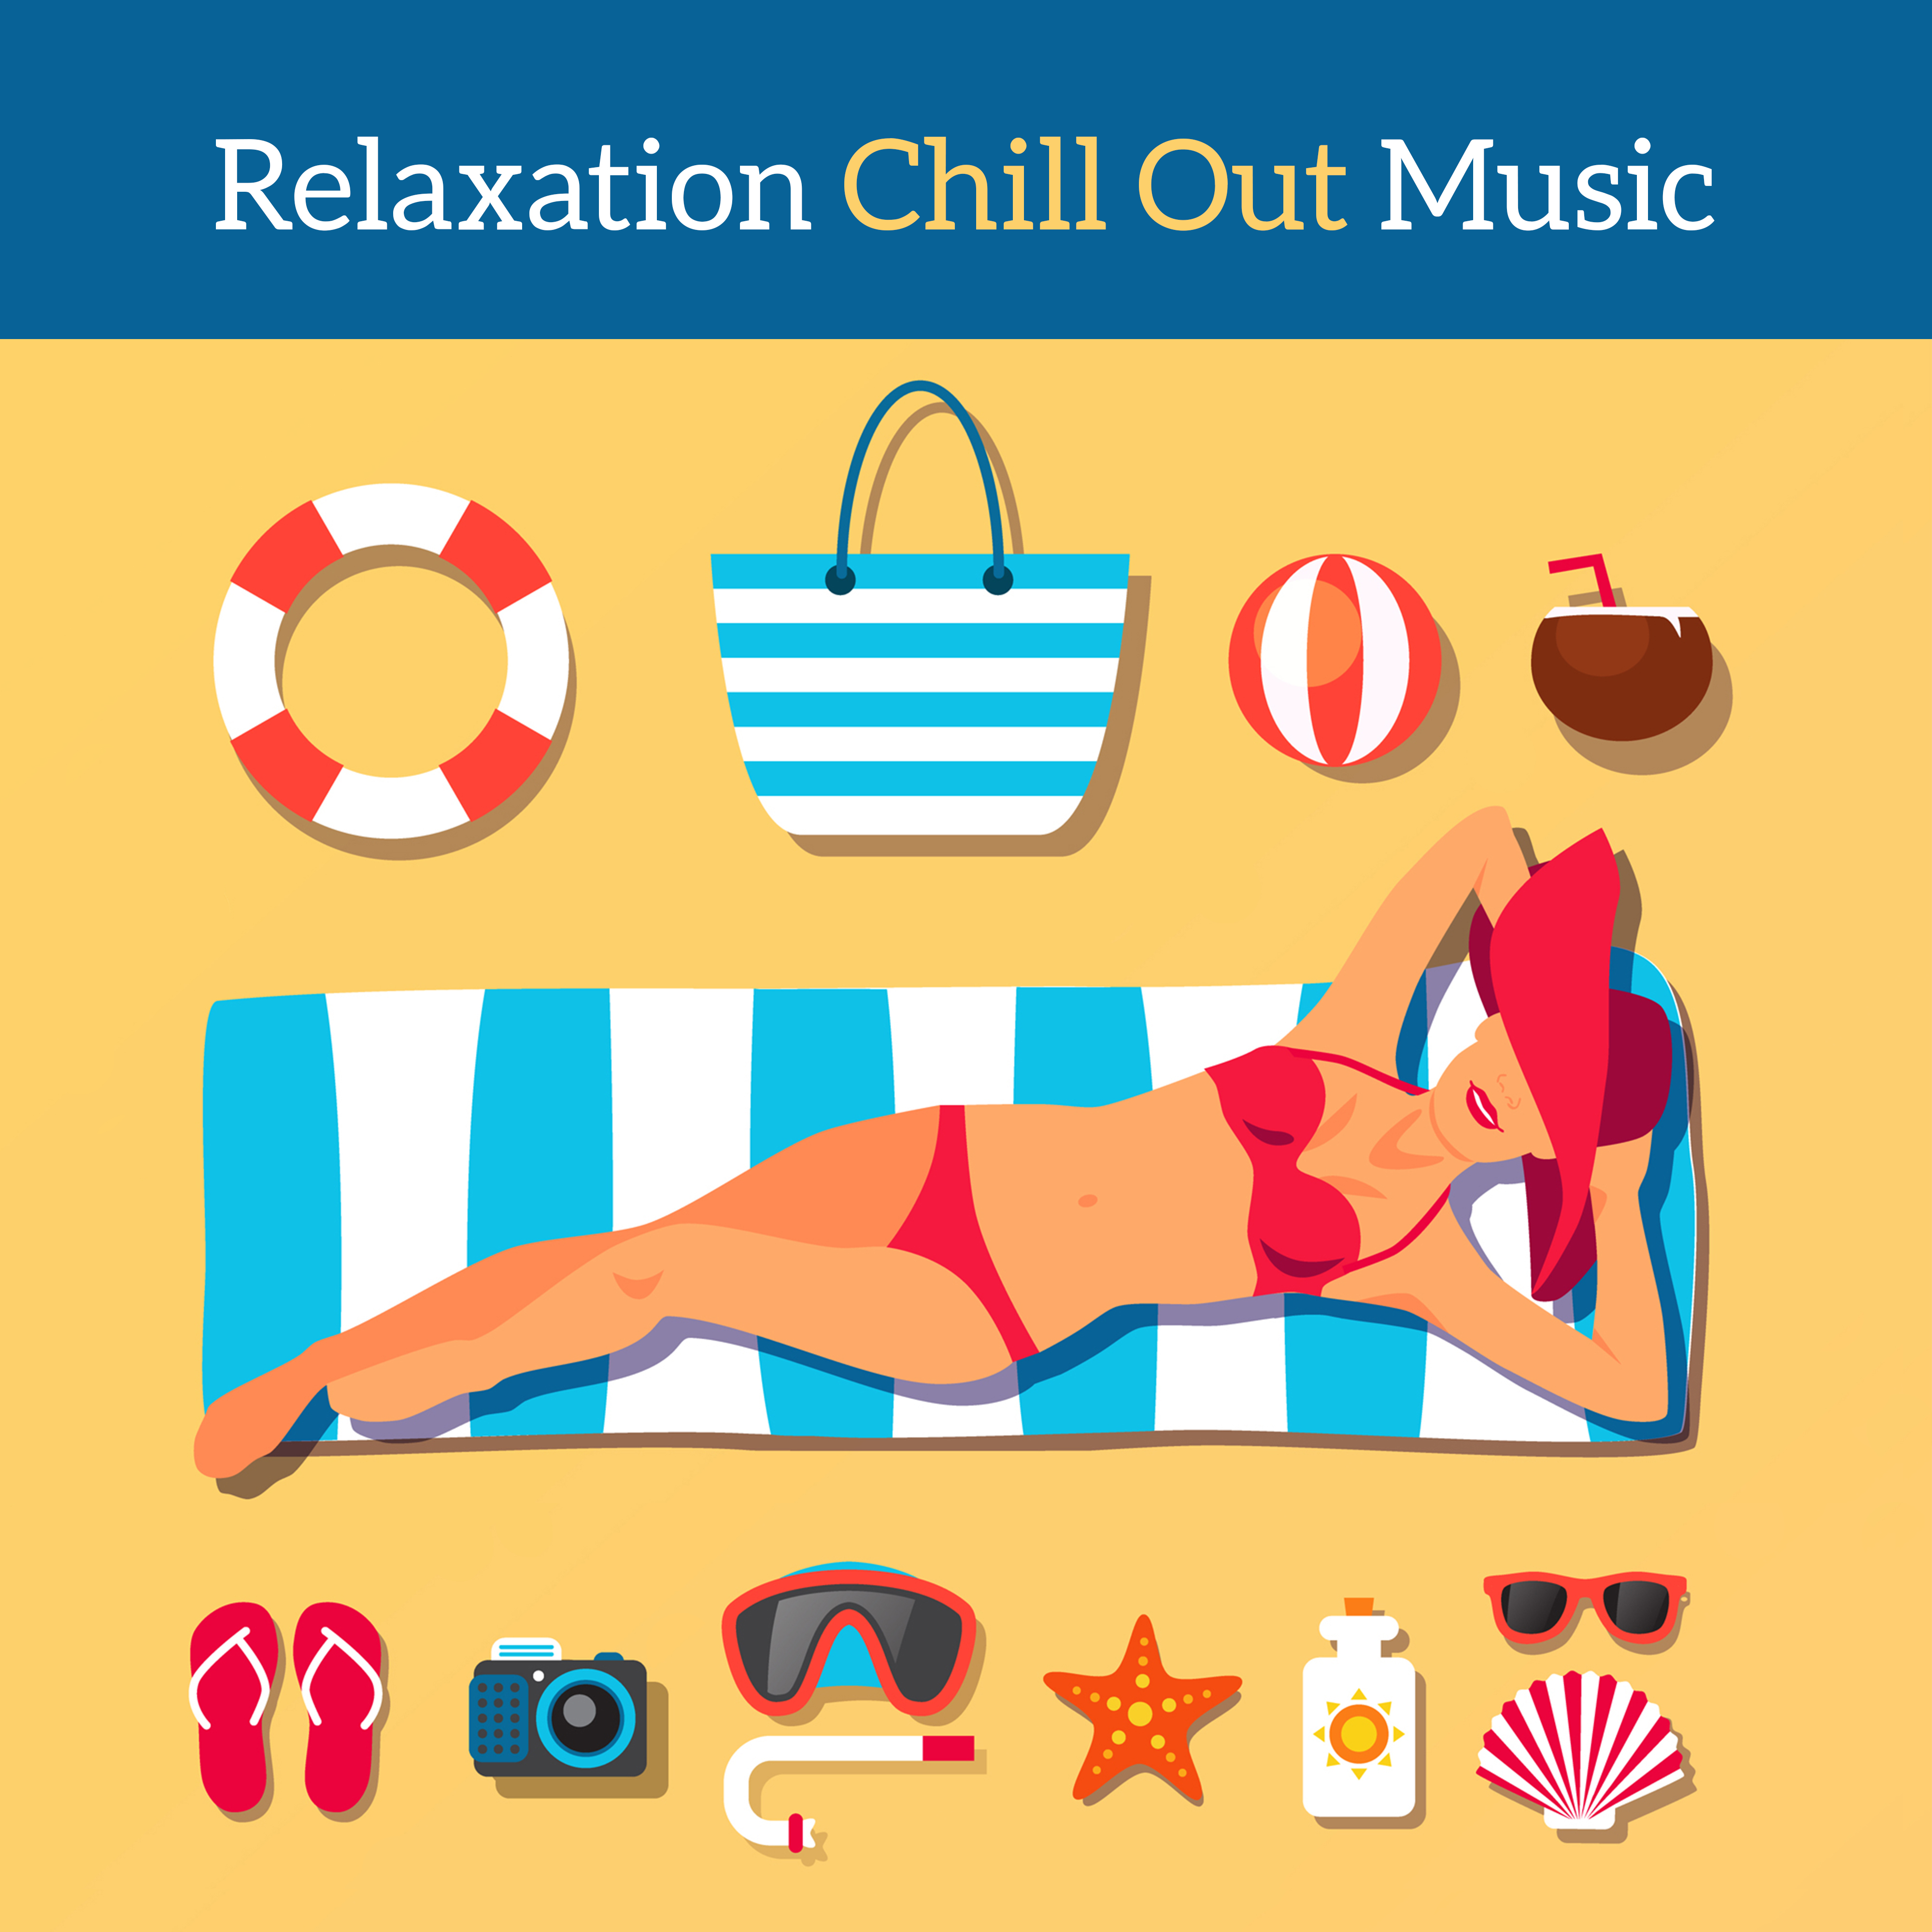 Relaxation Chill Out Music